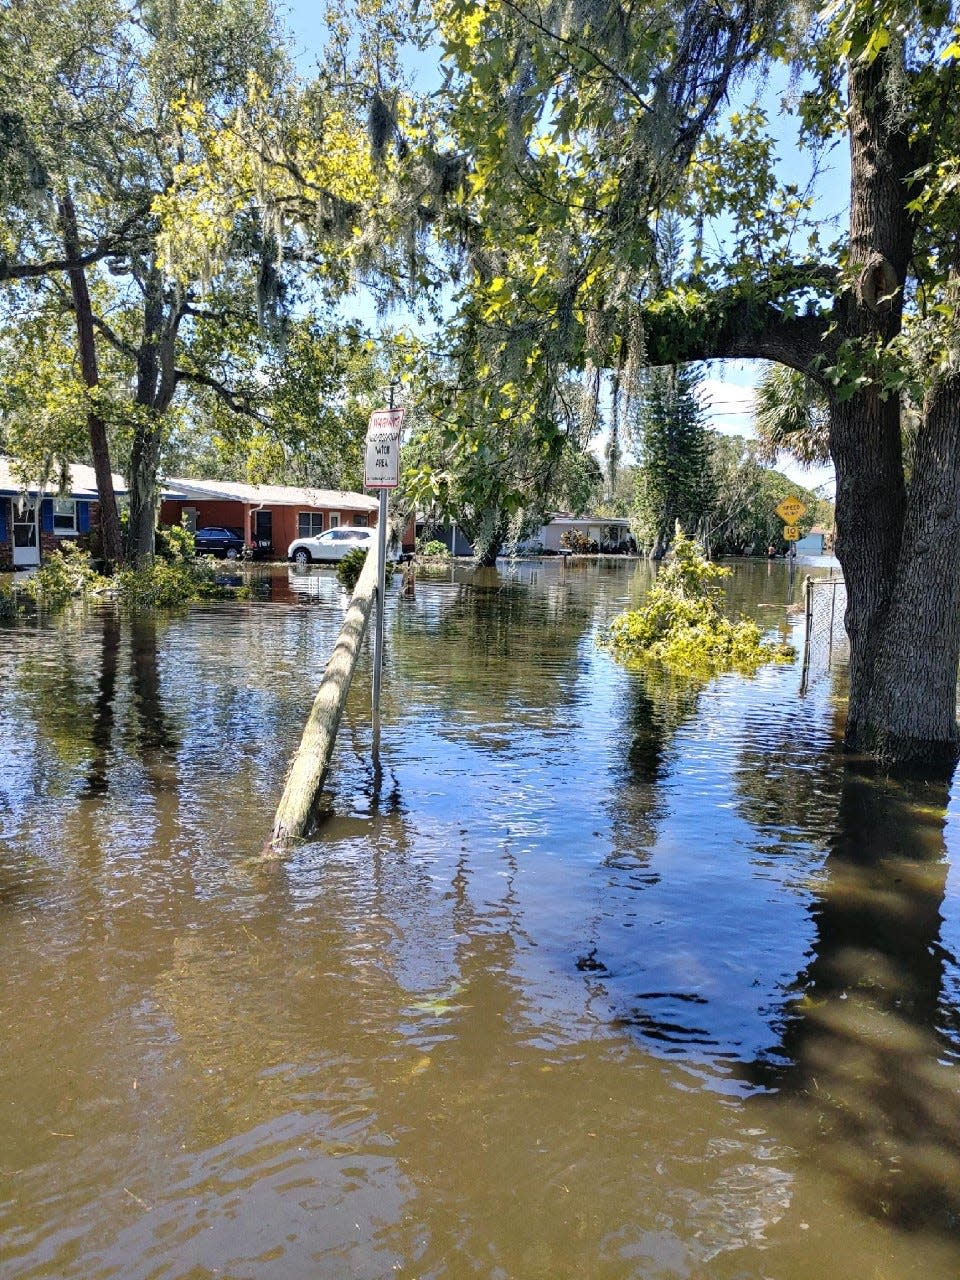 Daytona Beach's Midtown neighborhood was inundated with floodwater that rose as high as five feet in some areas of the community between Nova Road and Ridgewood Avenue after Tropical Storm Ian swept through the area in the fall of 2022. Pictured is Lockhart Street off of Kottle Circle as it looked on Sept. 30, 2022.